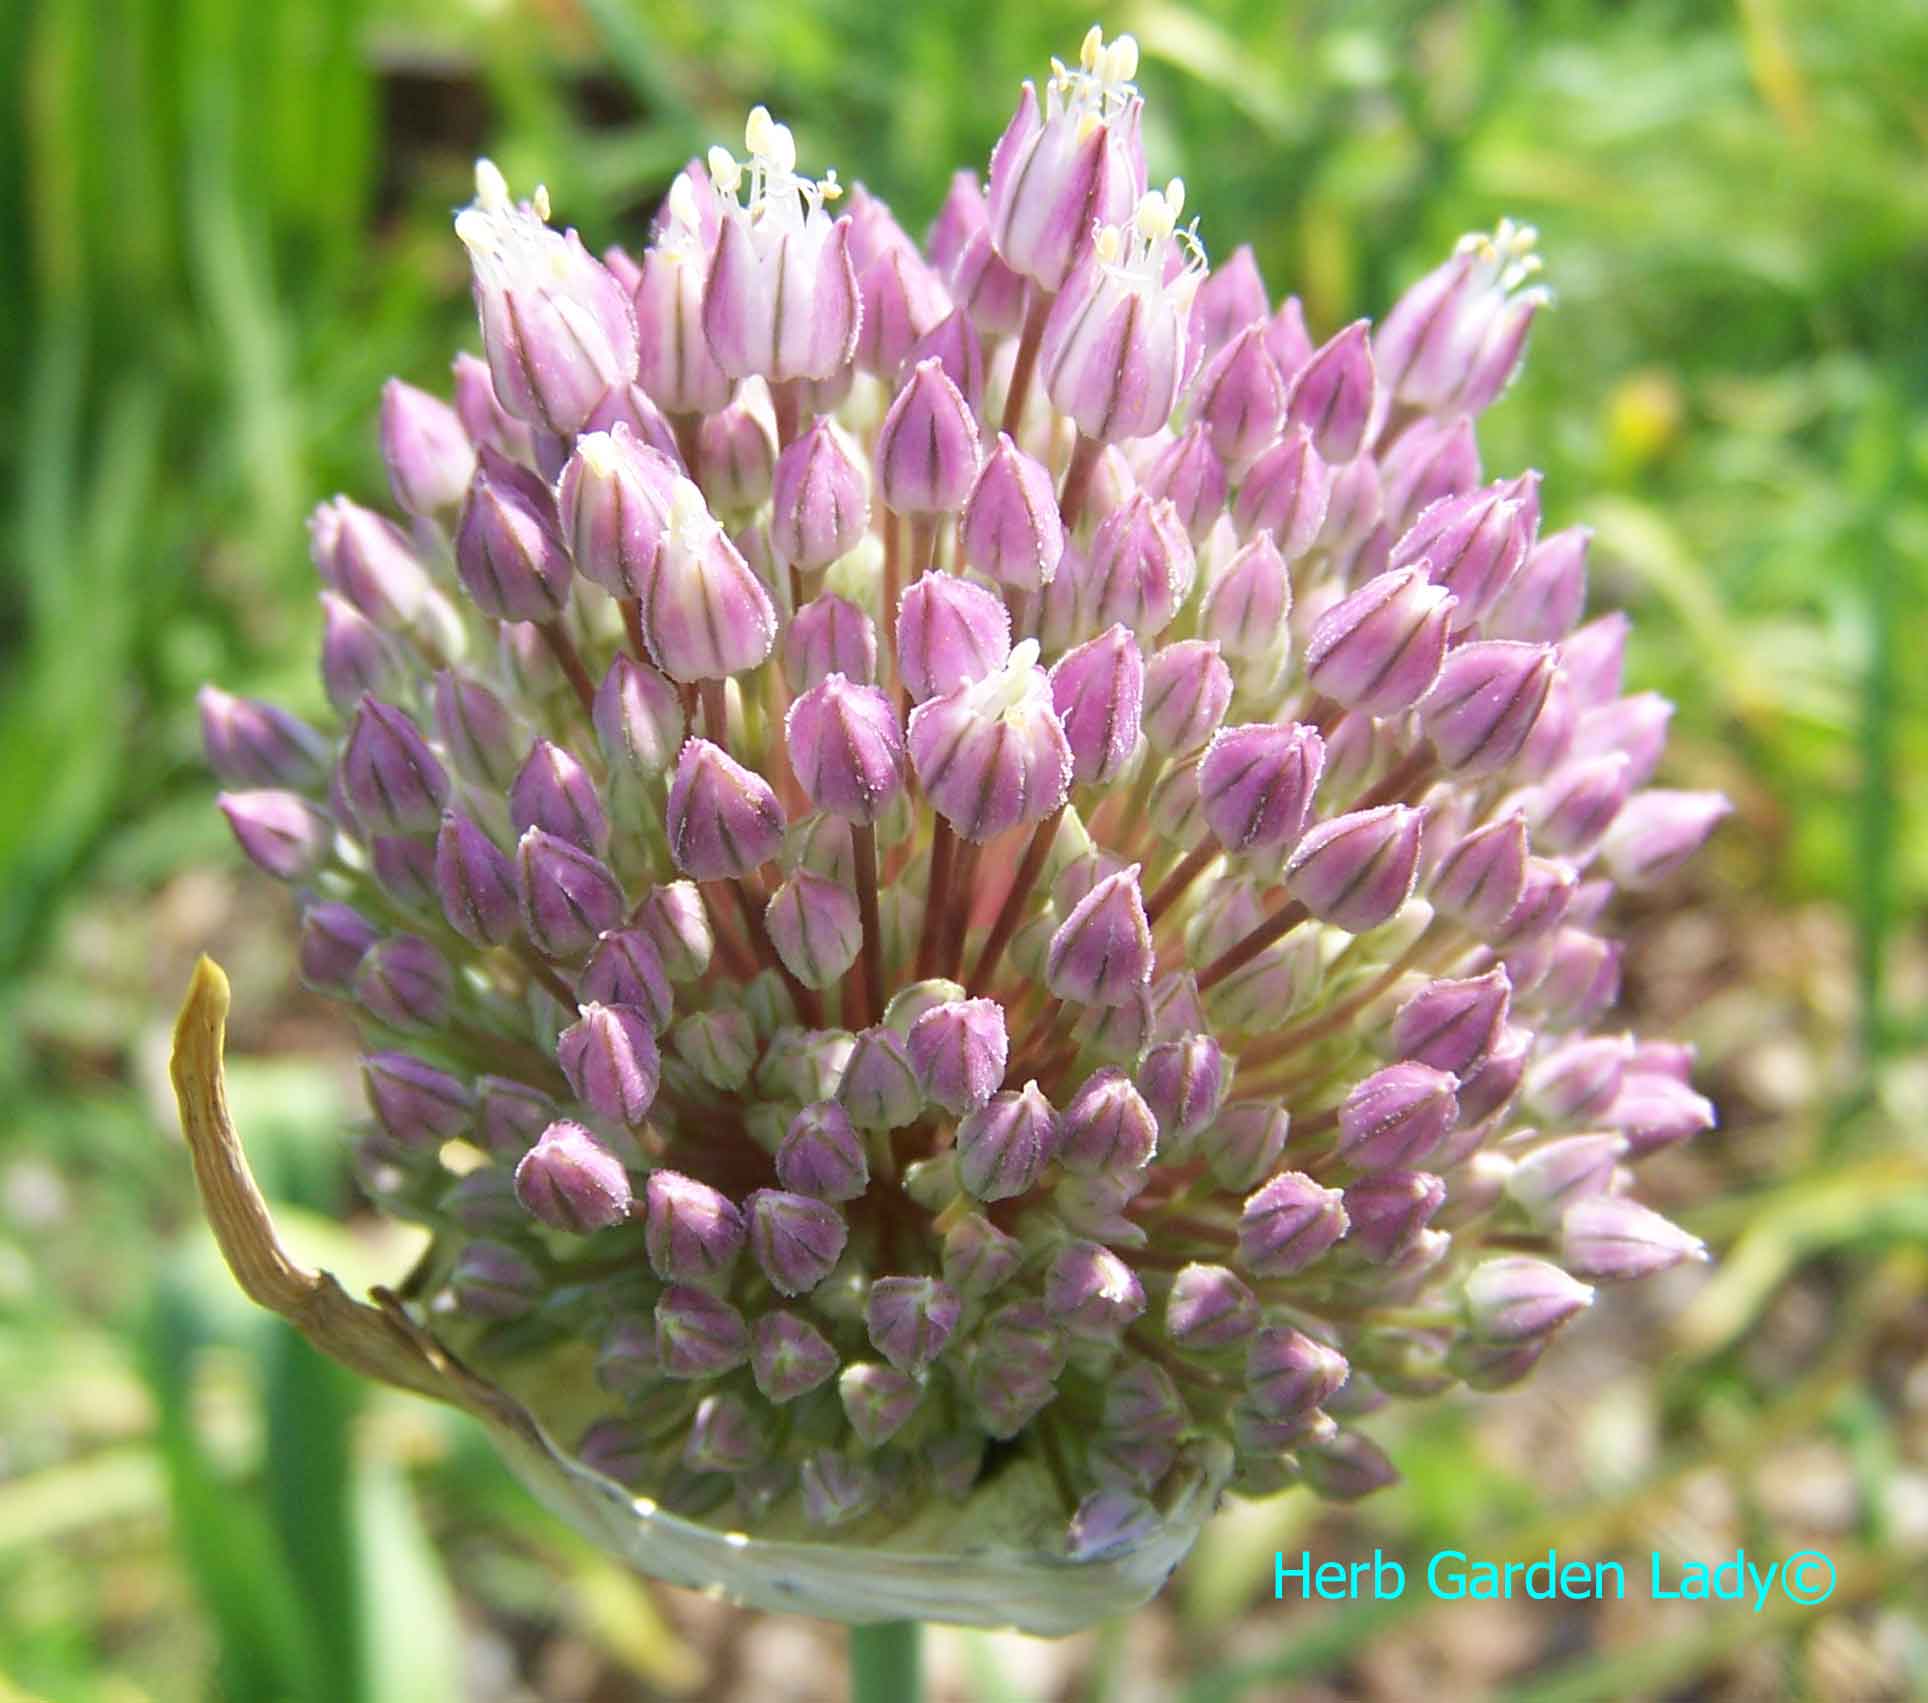 Chive blossom